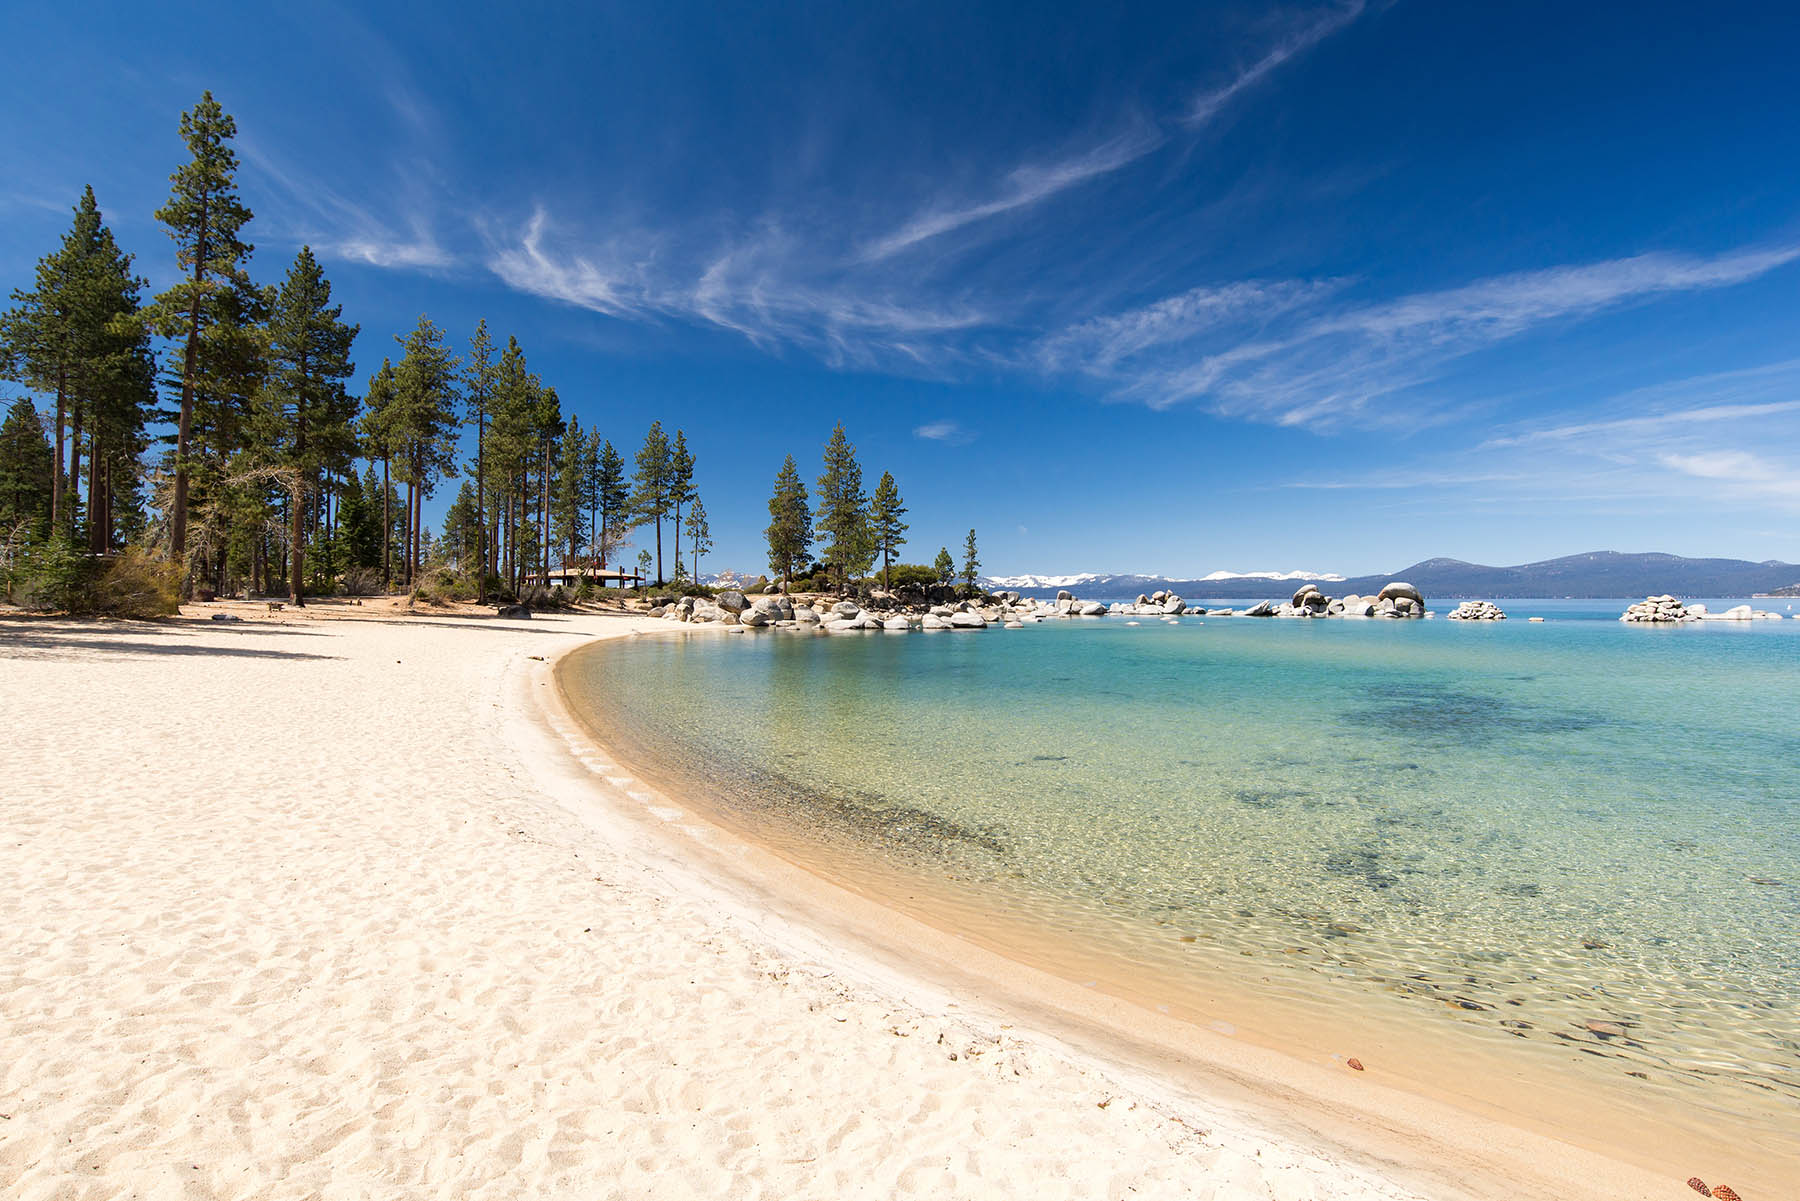 Enjoy Lake Tahoe - Lake Tahoe’s Best Beaches for Relaxation and Recreation